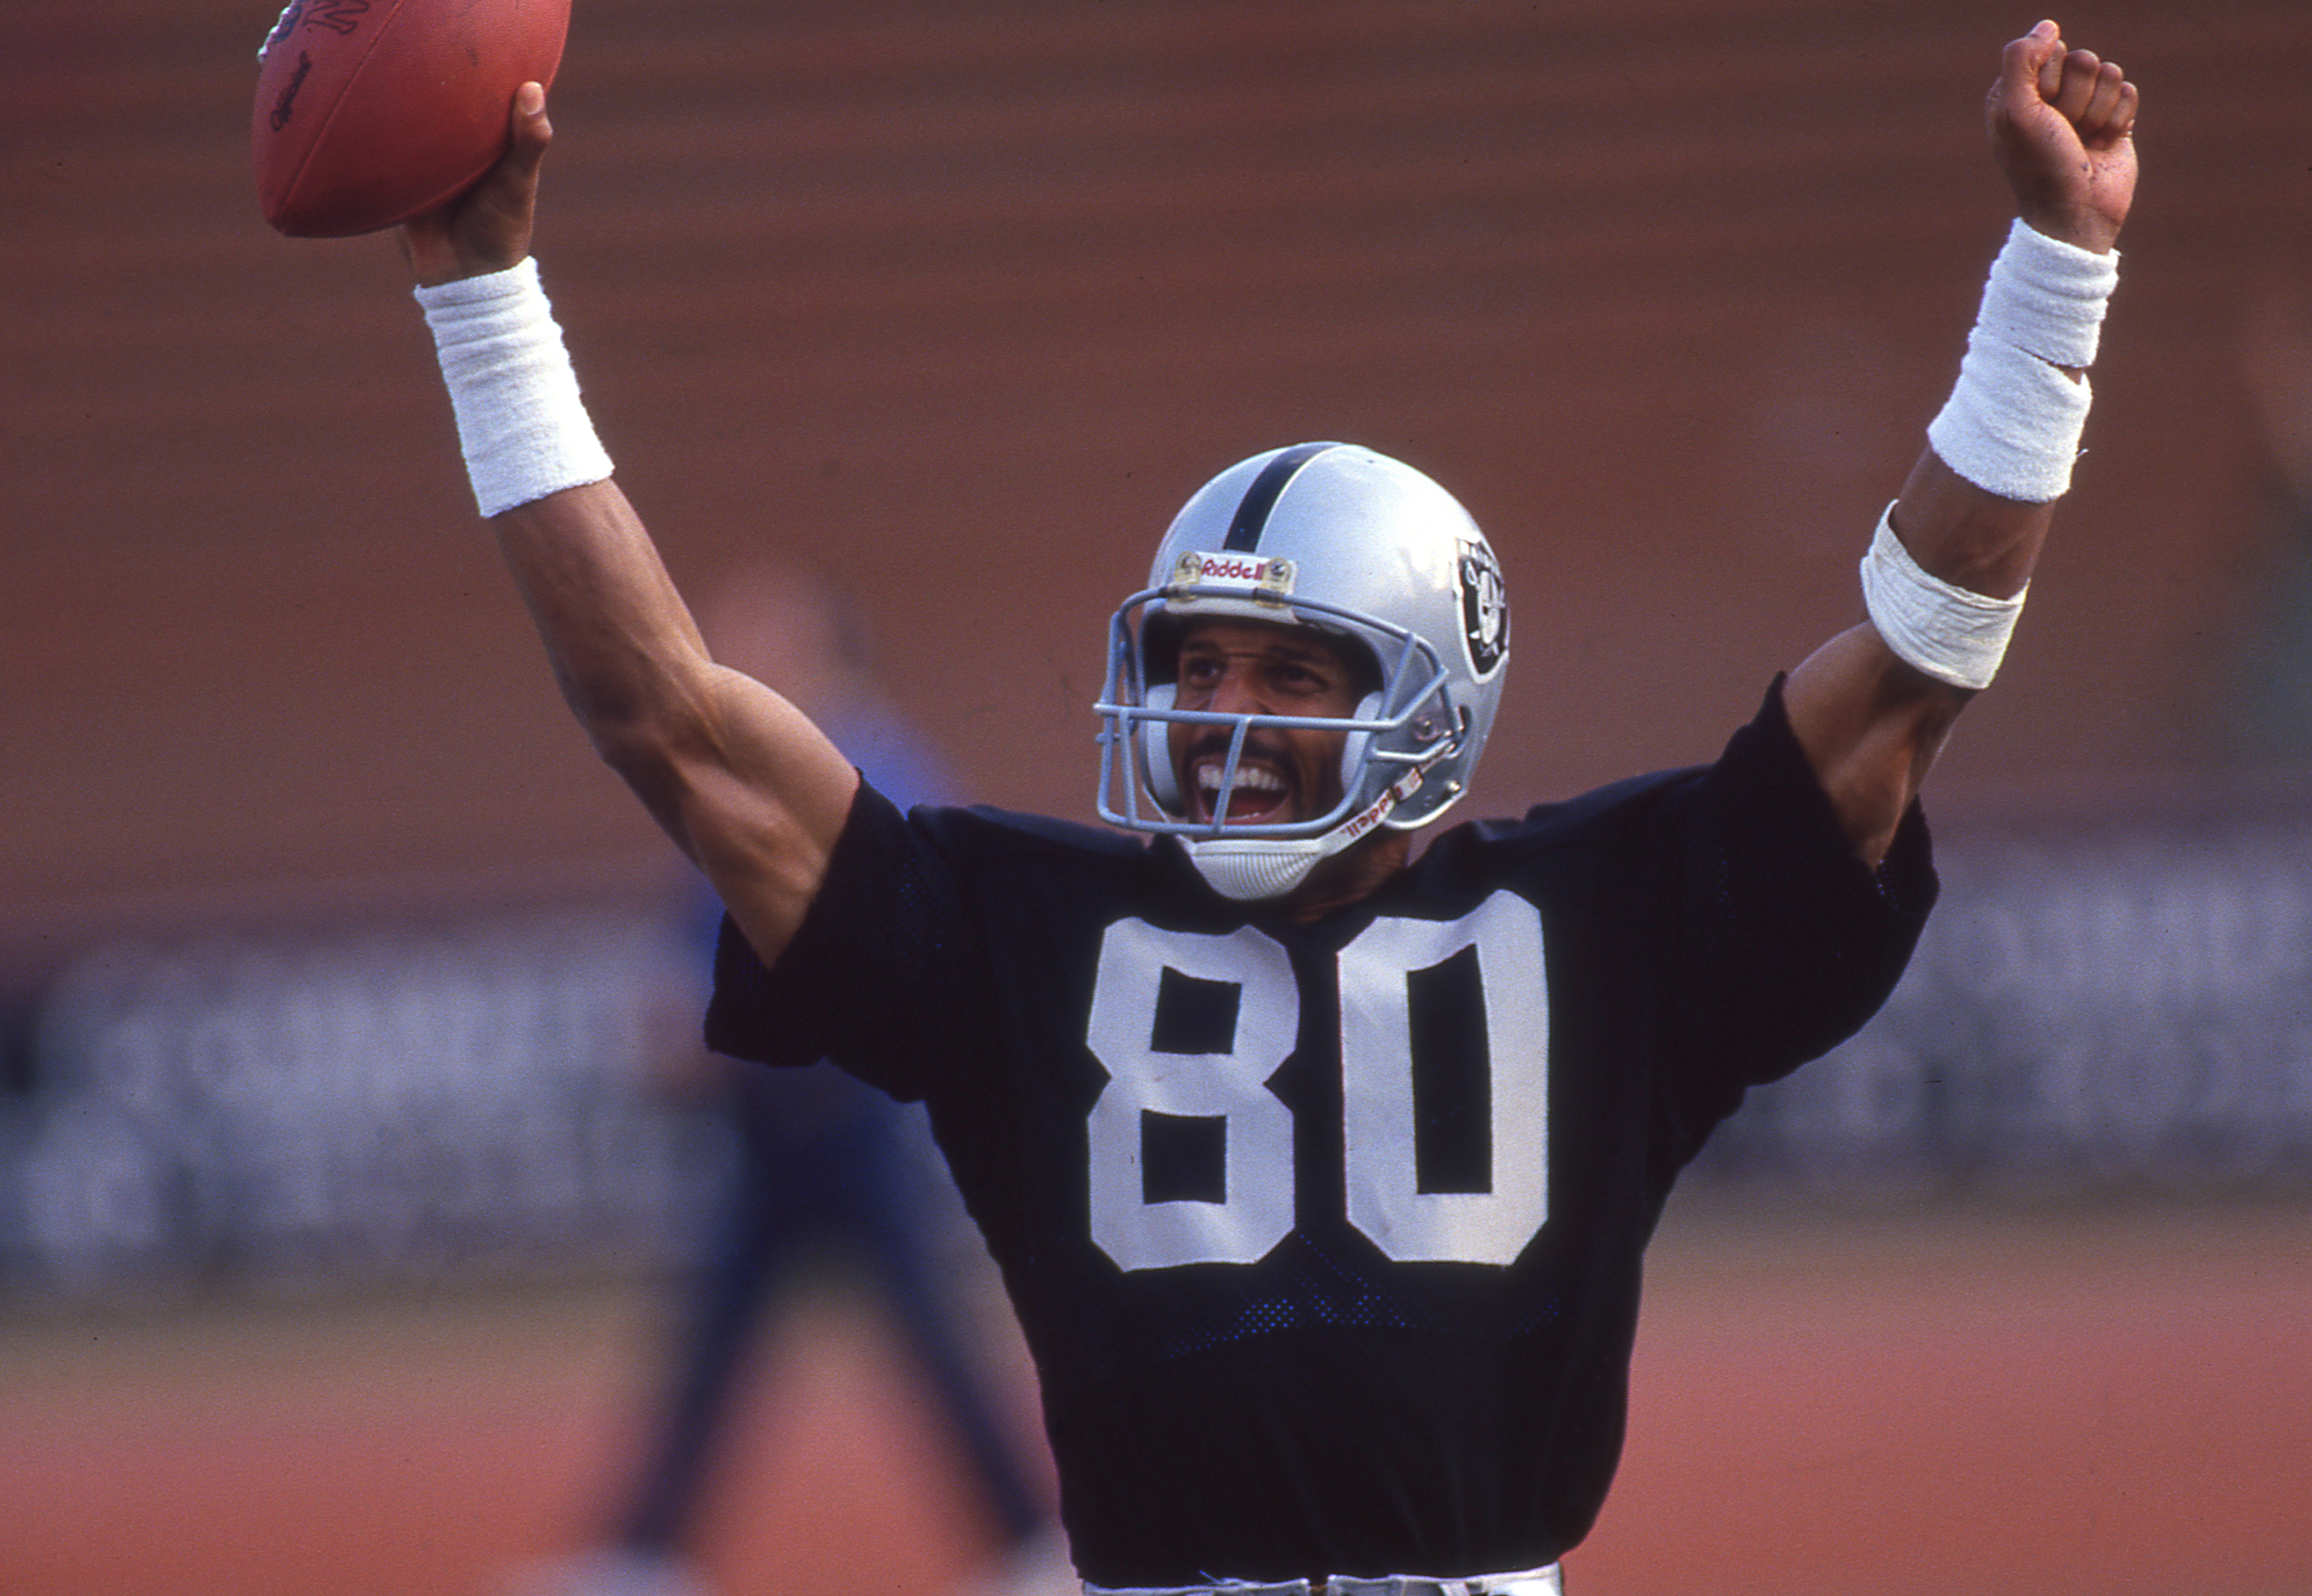 James Lofton was not nearly as productive with the Raiders as he was with the Packers